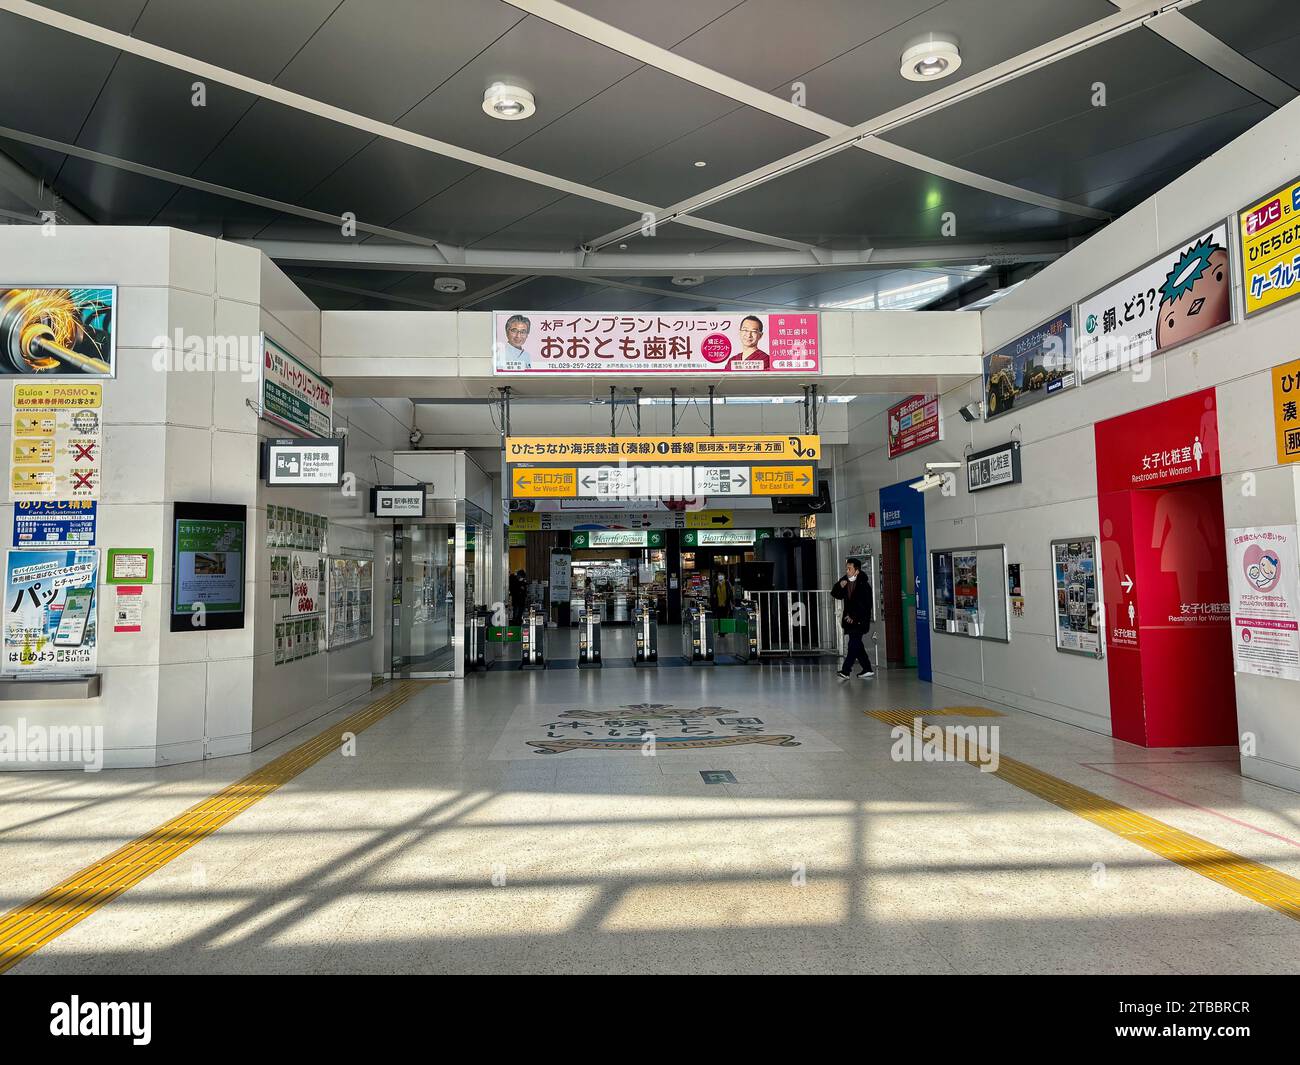 Interior of Katsuta Station in Ibaraki, Japan. This station is served by the Joban Line from Ueno in Tokyo. Stock Photo